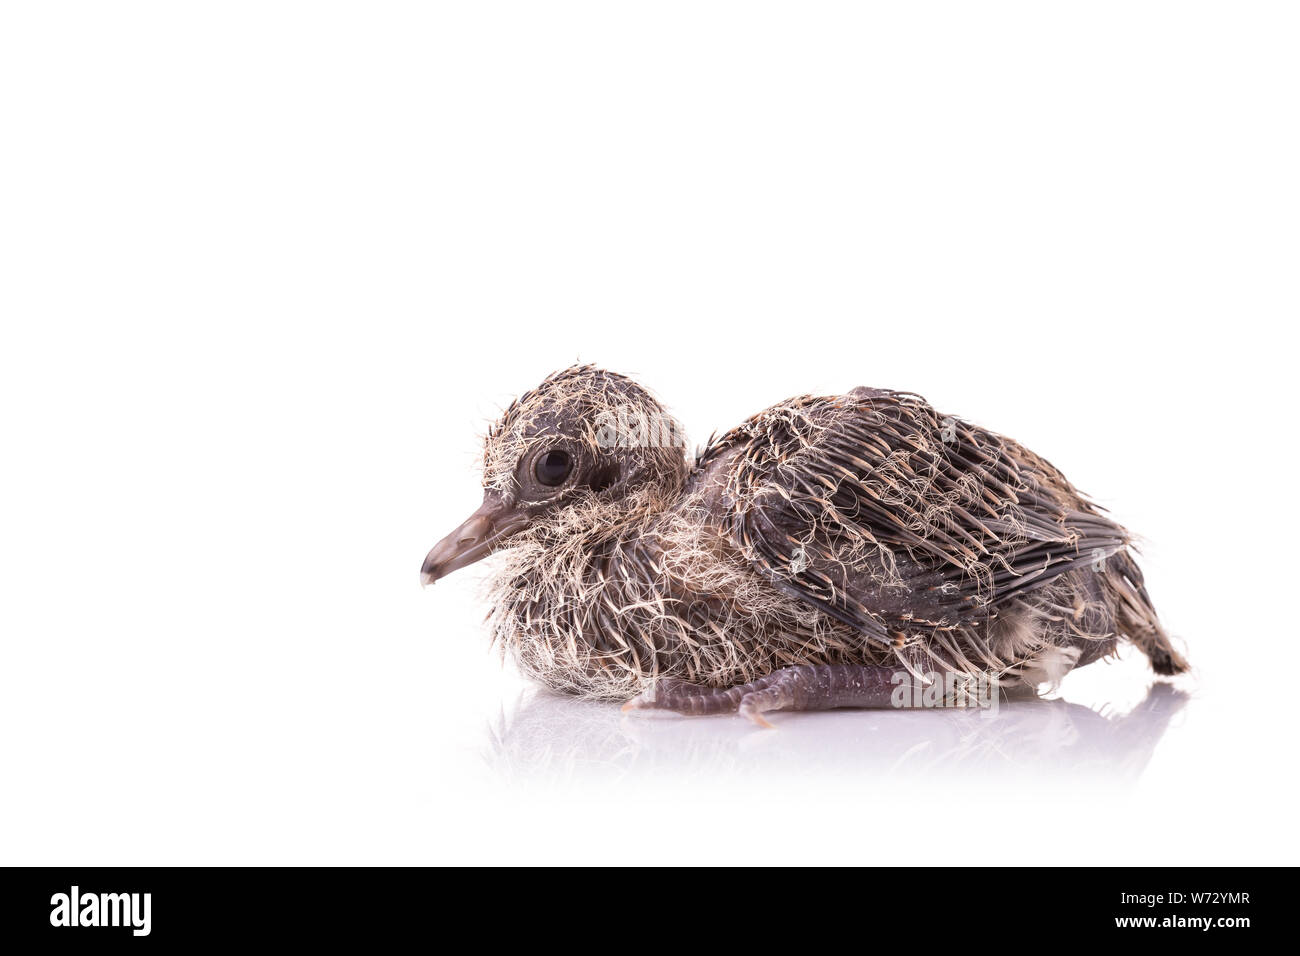 Top view two of baby birds on white background Stock Photo